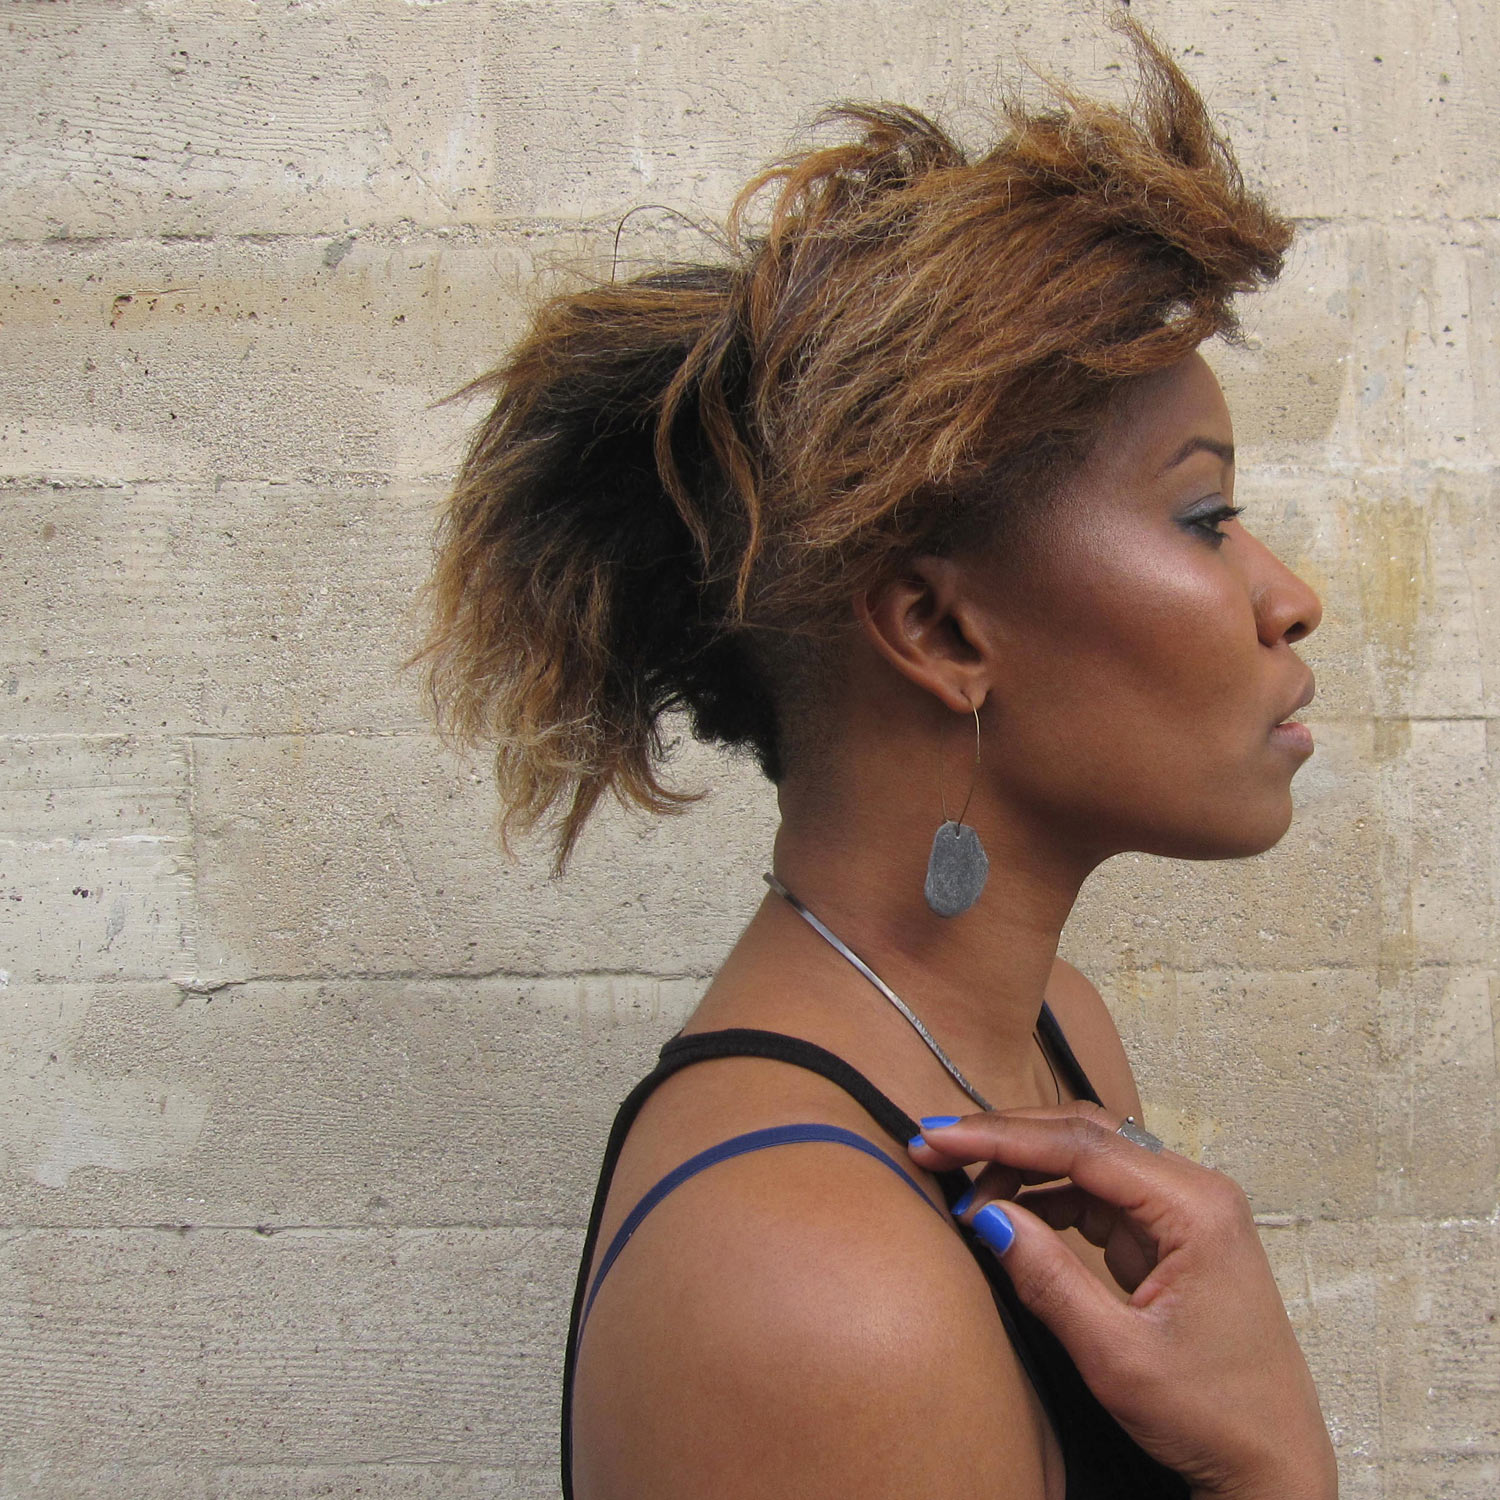 areali necklace + sasso patagonico earrings + relitto organico ring